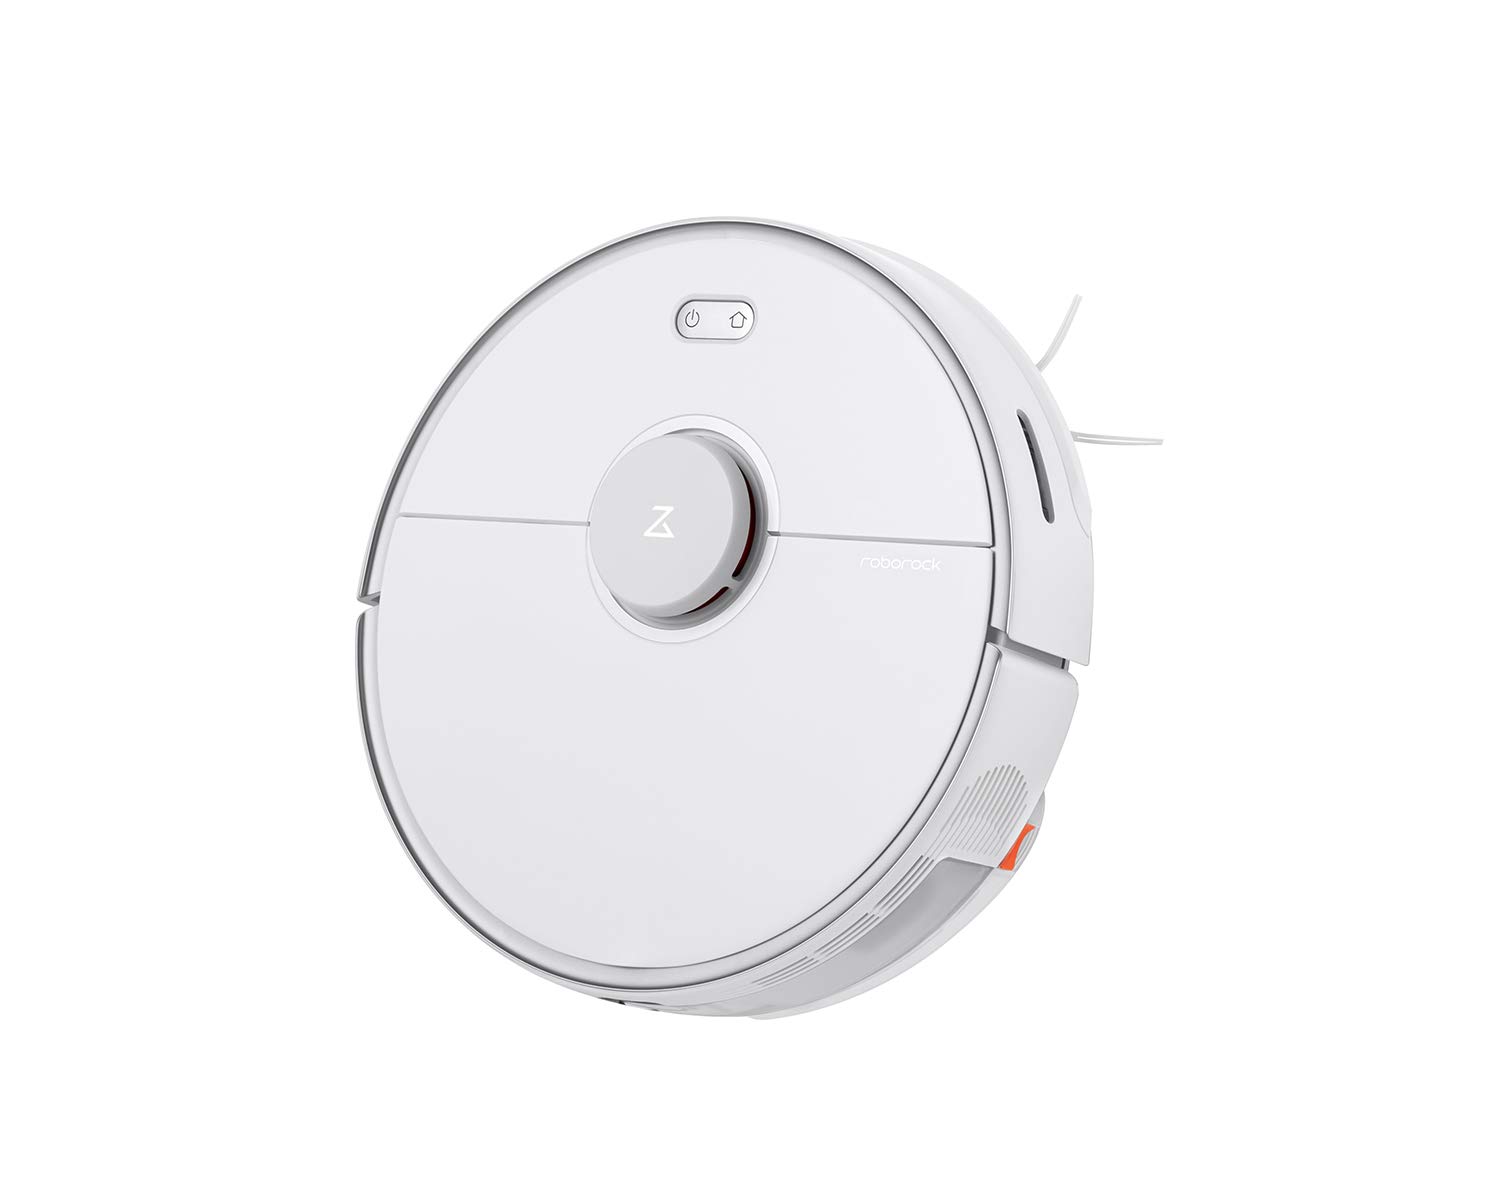 Roborock S5 MAX Robot Vacuum and Mop Cleaner $380 final price with 170 off coupon